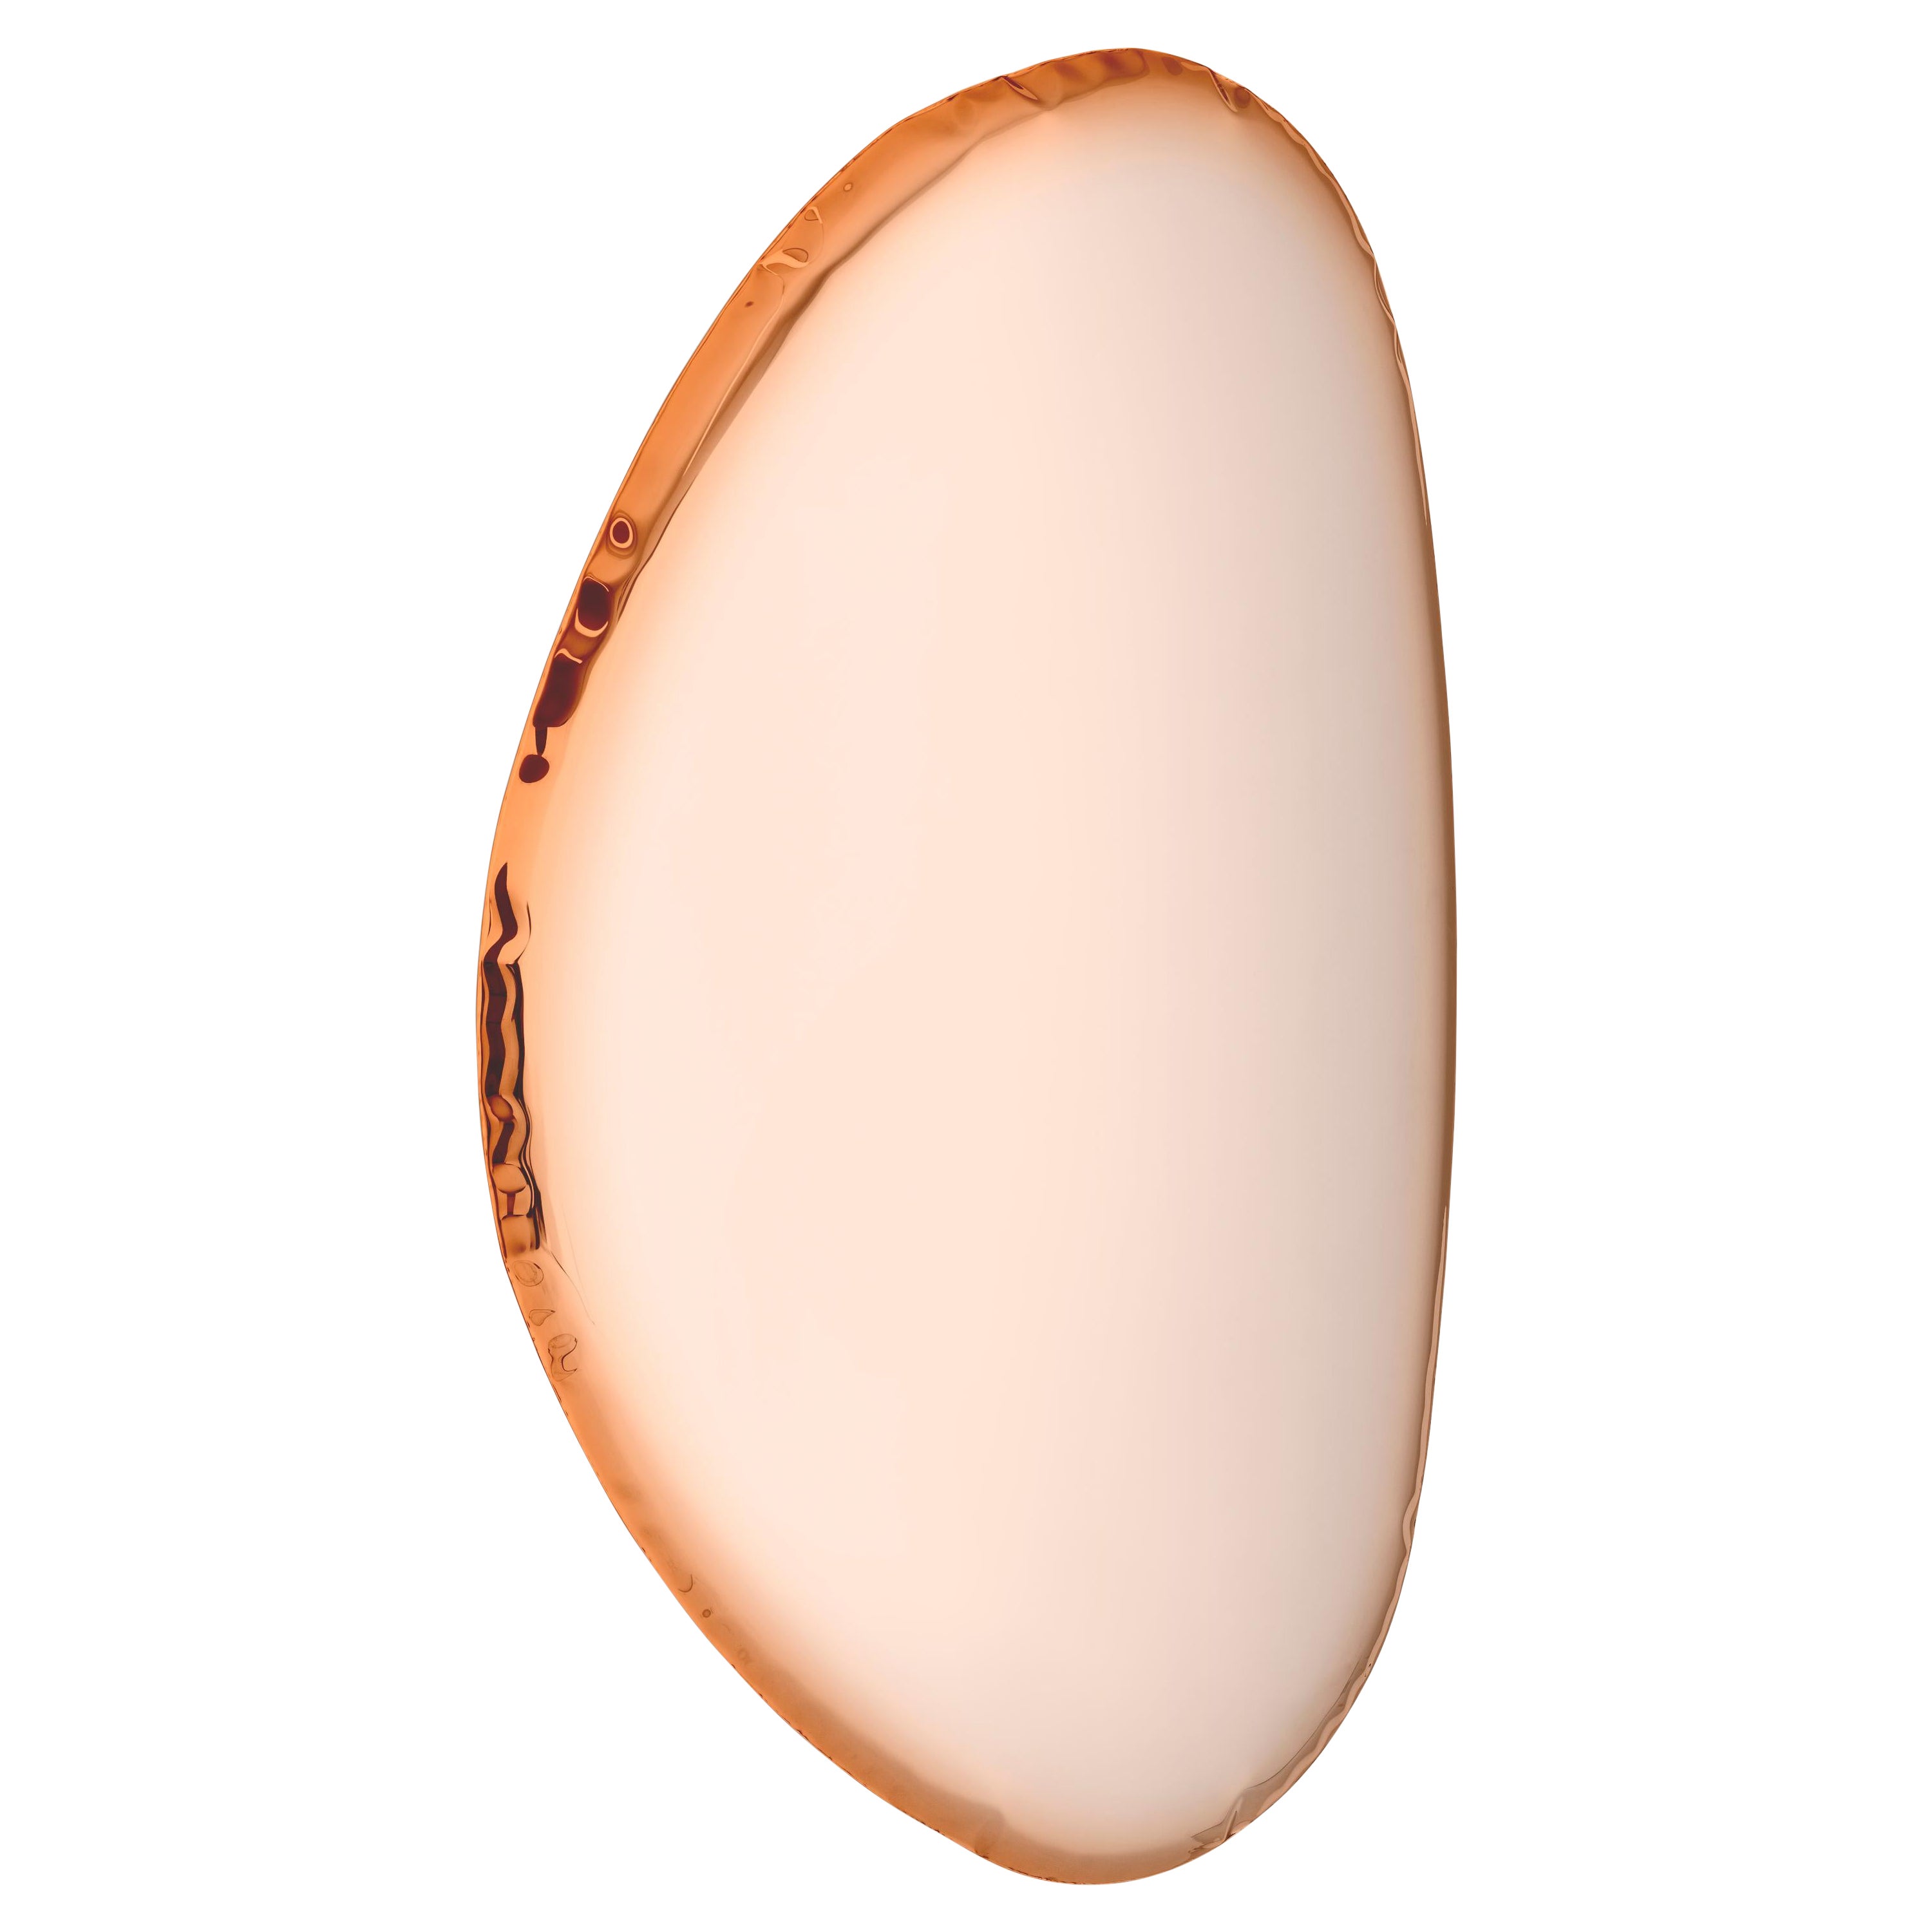 Tafla O2 Polished Stainless Steel Rose Gold Color Wall Mirror by Zieta For Sale